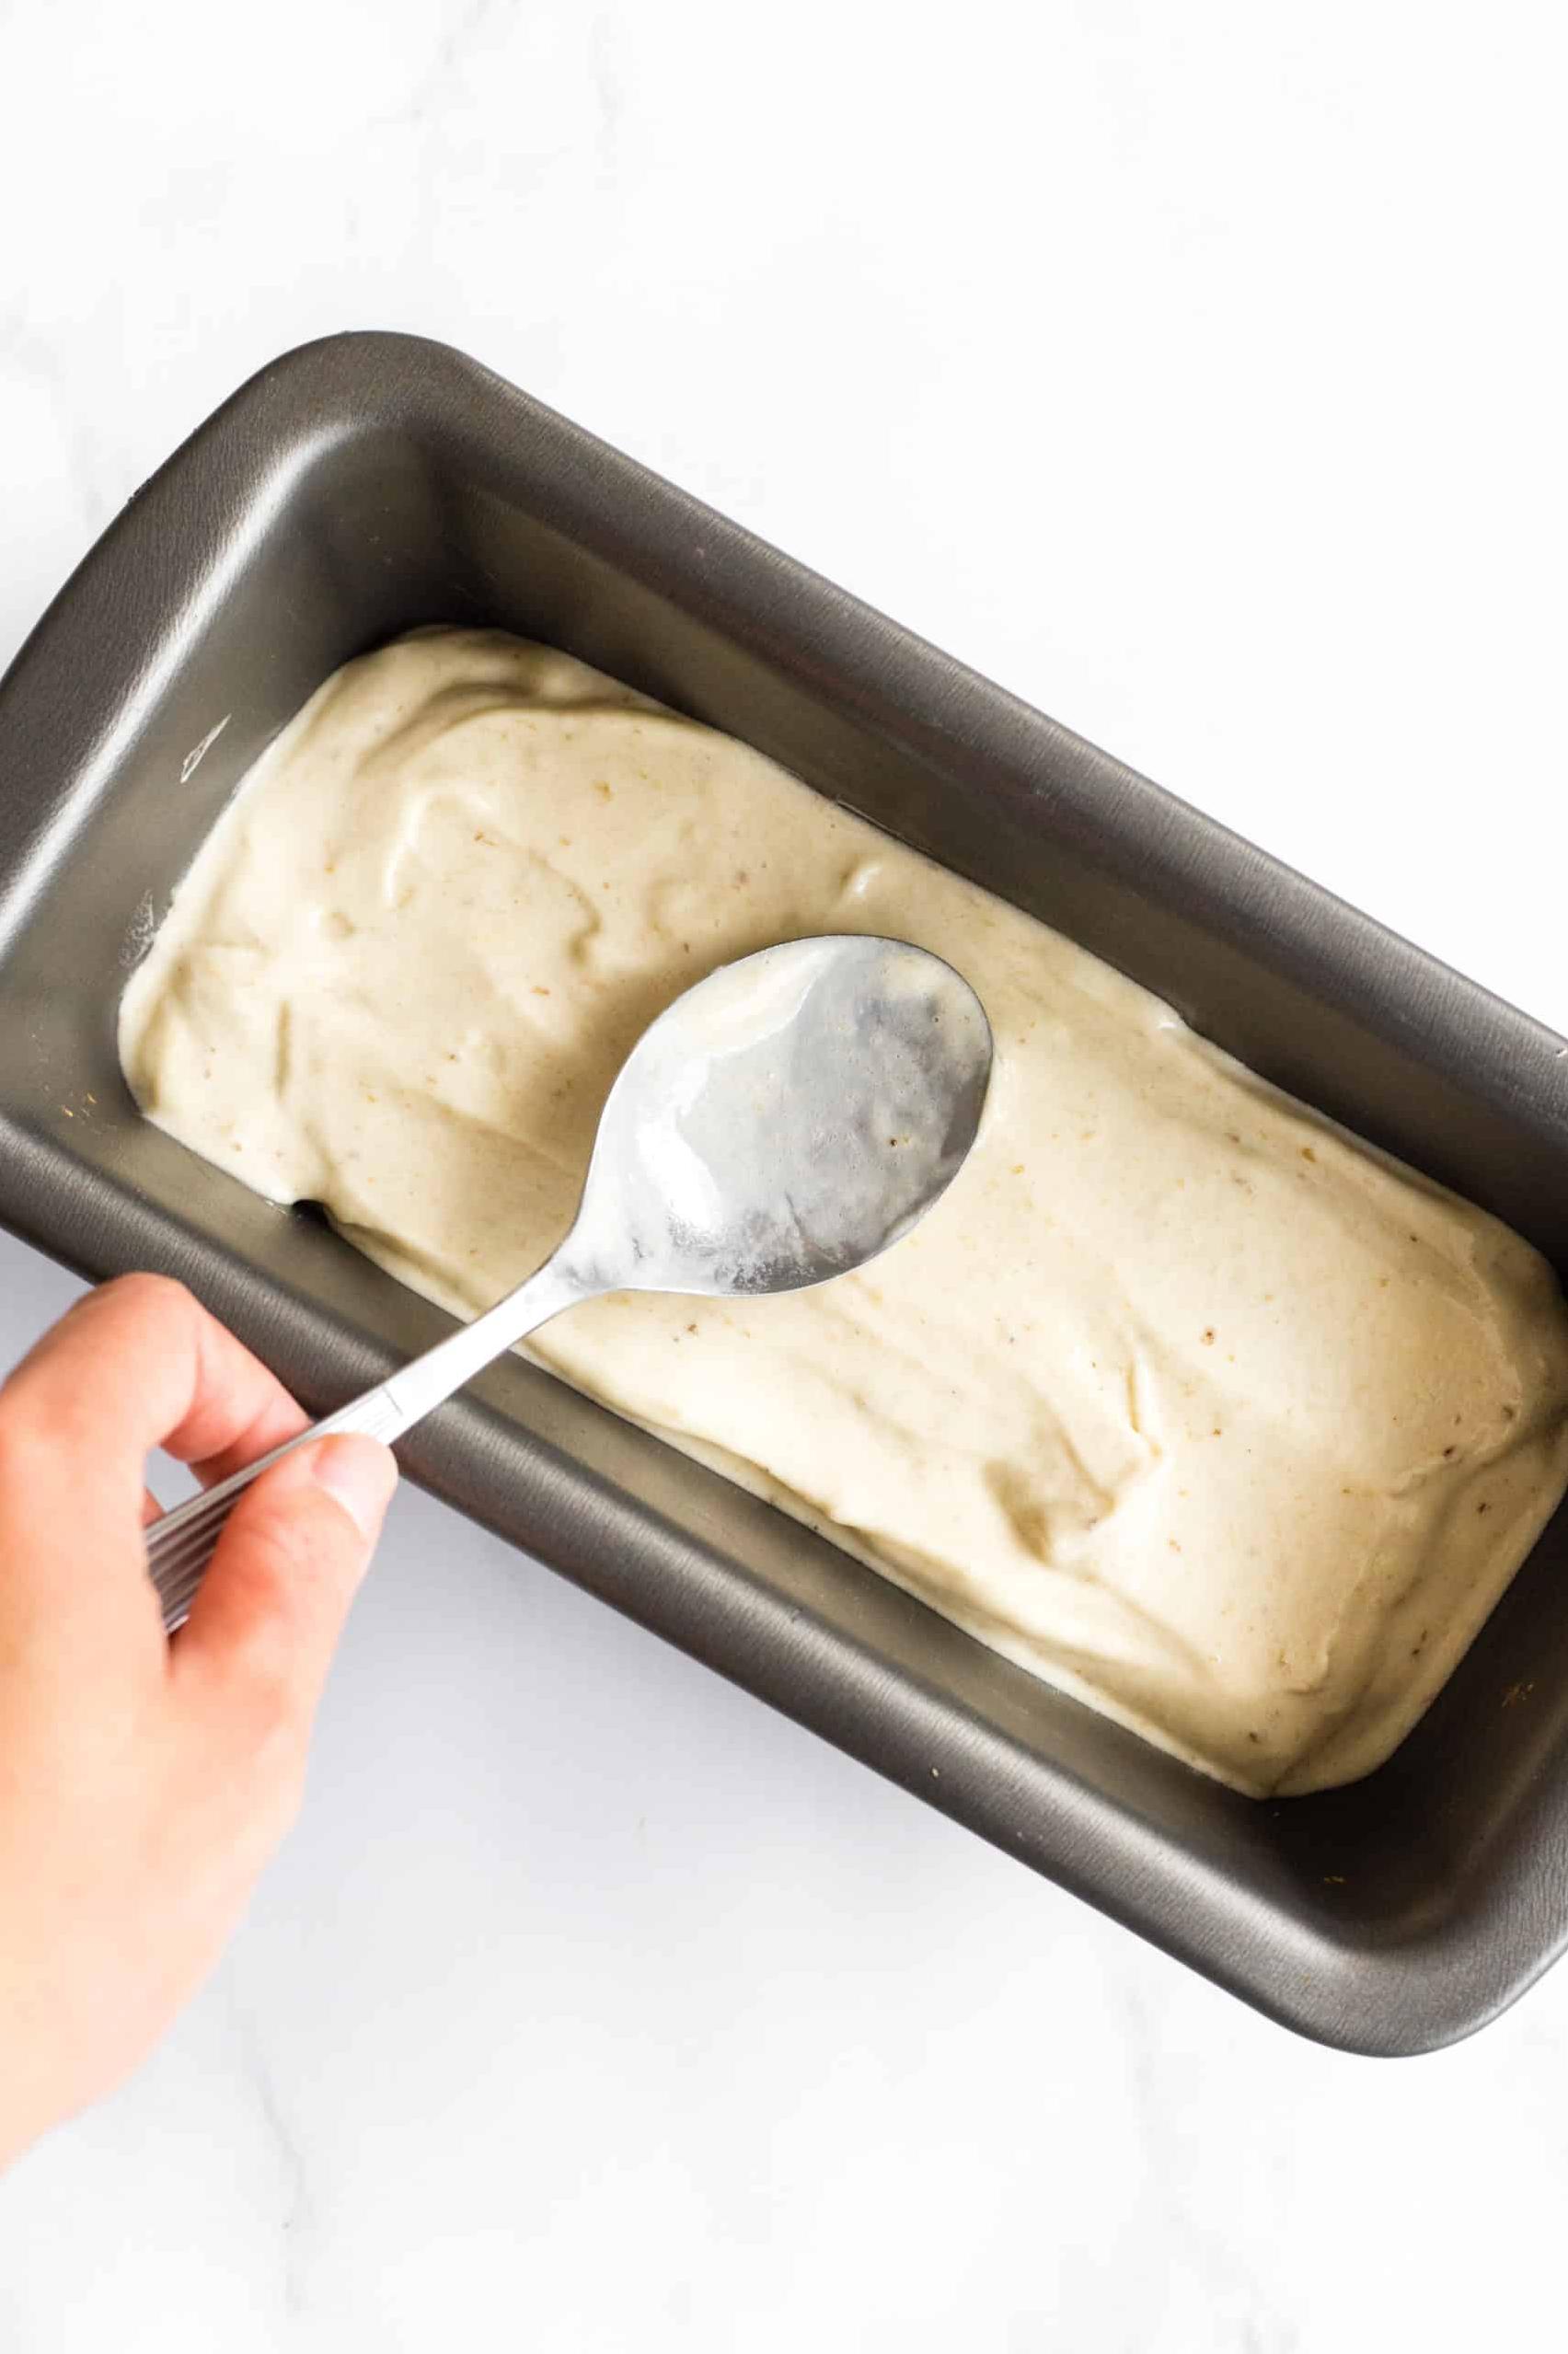  When I am craving something sweet and cold, this vegan banana ice cream is my go-to dessert.